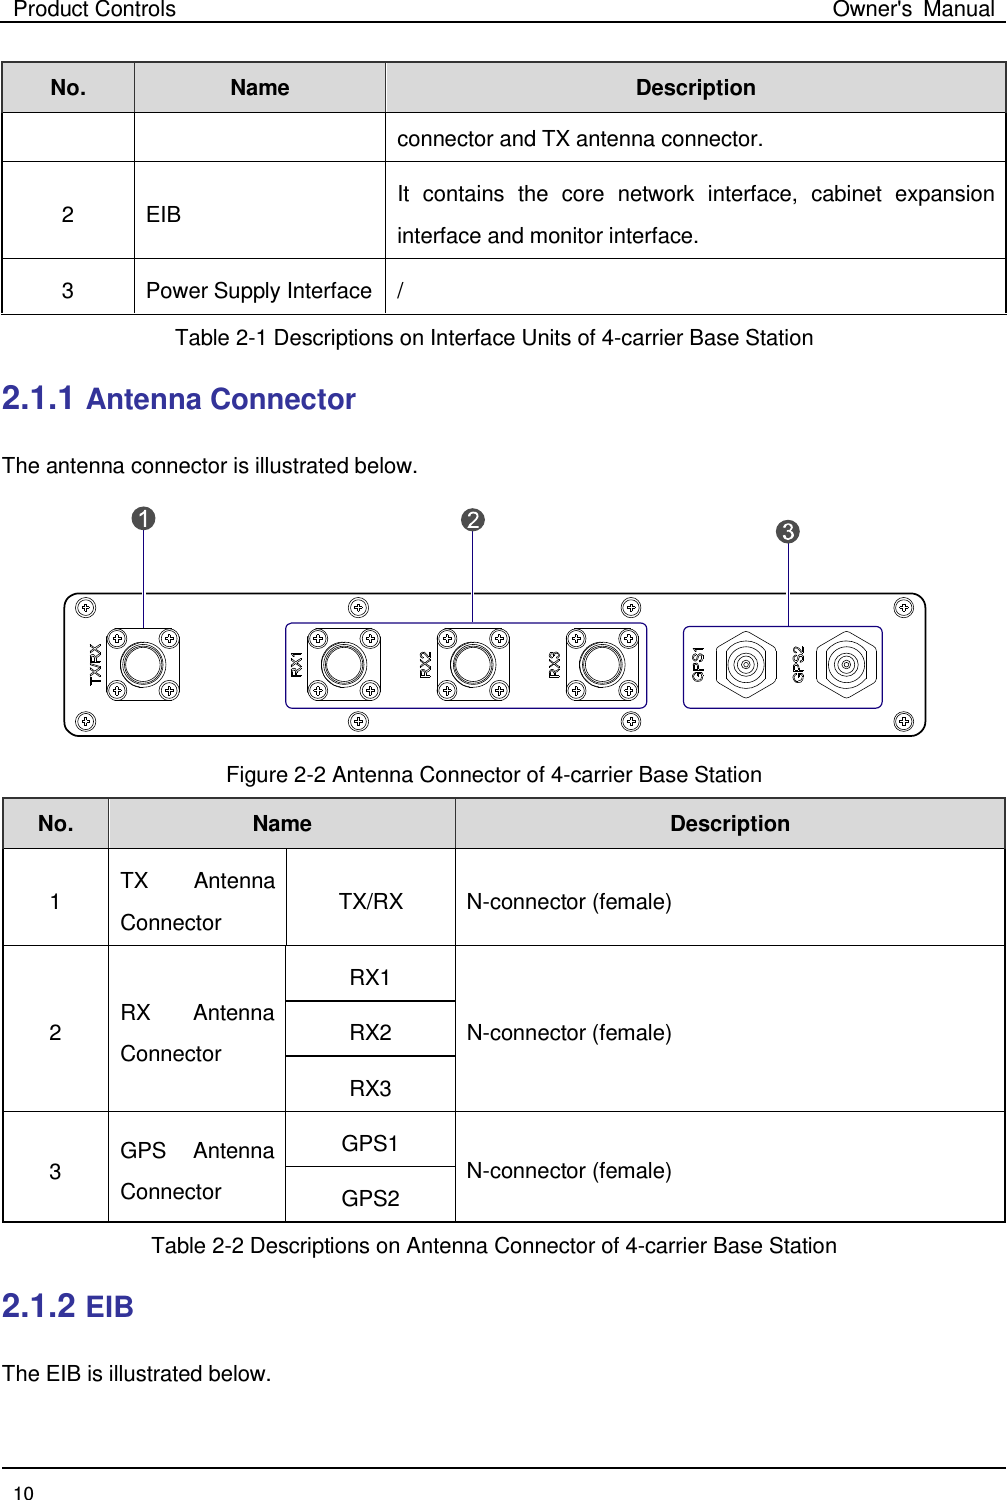 Product Controls Owner&apos;s Manual  10  No. Name   Description   connector and TX antenna connector. 2  EIB It contains the core network interface, cabinet expansion interface and monitor interface.   3  Power Supply Interface  / Table 2-1 Descriptions on Interface Units of 4-carrier Base Station 2.1.1 Antenna Connector The antenna connector is illustrated below.  Figure 2-2 Antenna Connector of 4-carrier Base Station No. Name   Description   1 TX Antenna Connector   TX/RX  N-connector (female) 2 RX Antenna Connector RX1 N-connector (female) RX2 RX3 3 GPS Antenna Connector   GPS1 N-connector (female) GPS2 Table 2-2 Descriptions on Antenna Connector of 4-carrier Base Station 2.1.2 EIB The EIB is illustrated below. 